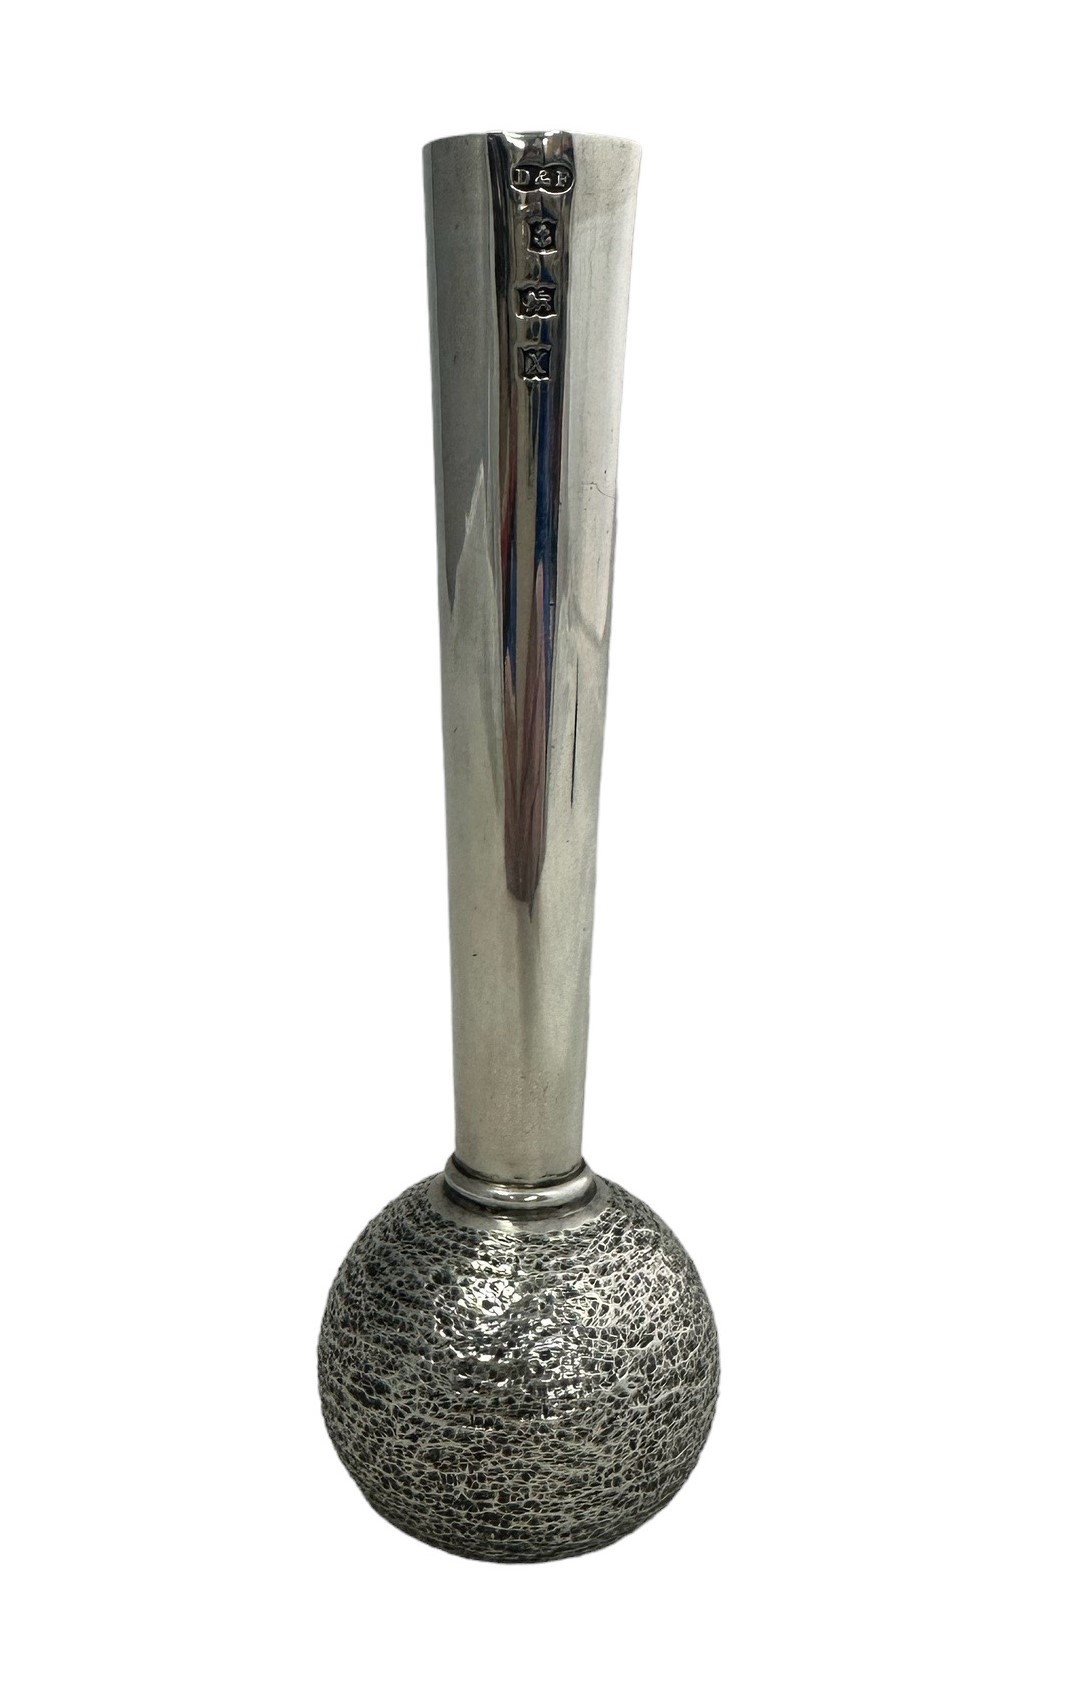 A Deakin & Francis silver bud vase with 1972 Hallmarks for Birmingham. 13.7cm approx high, 142g, - Image 2 of 3